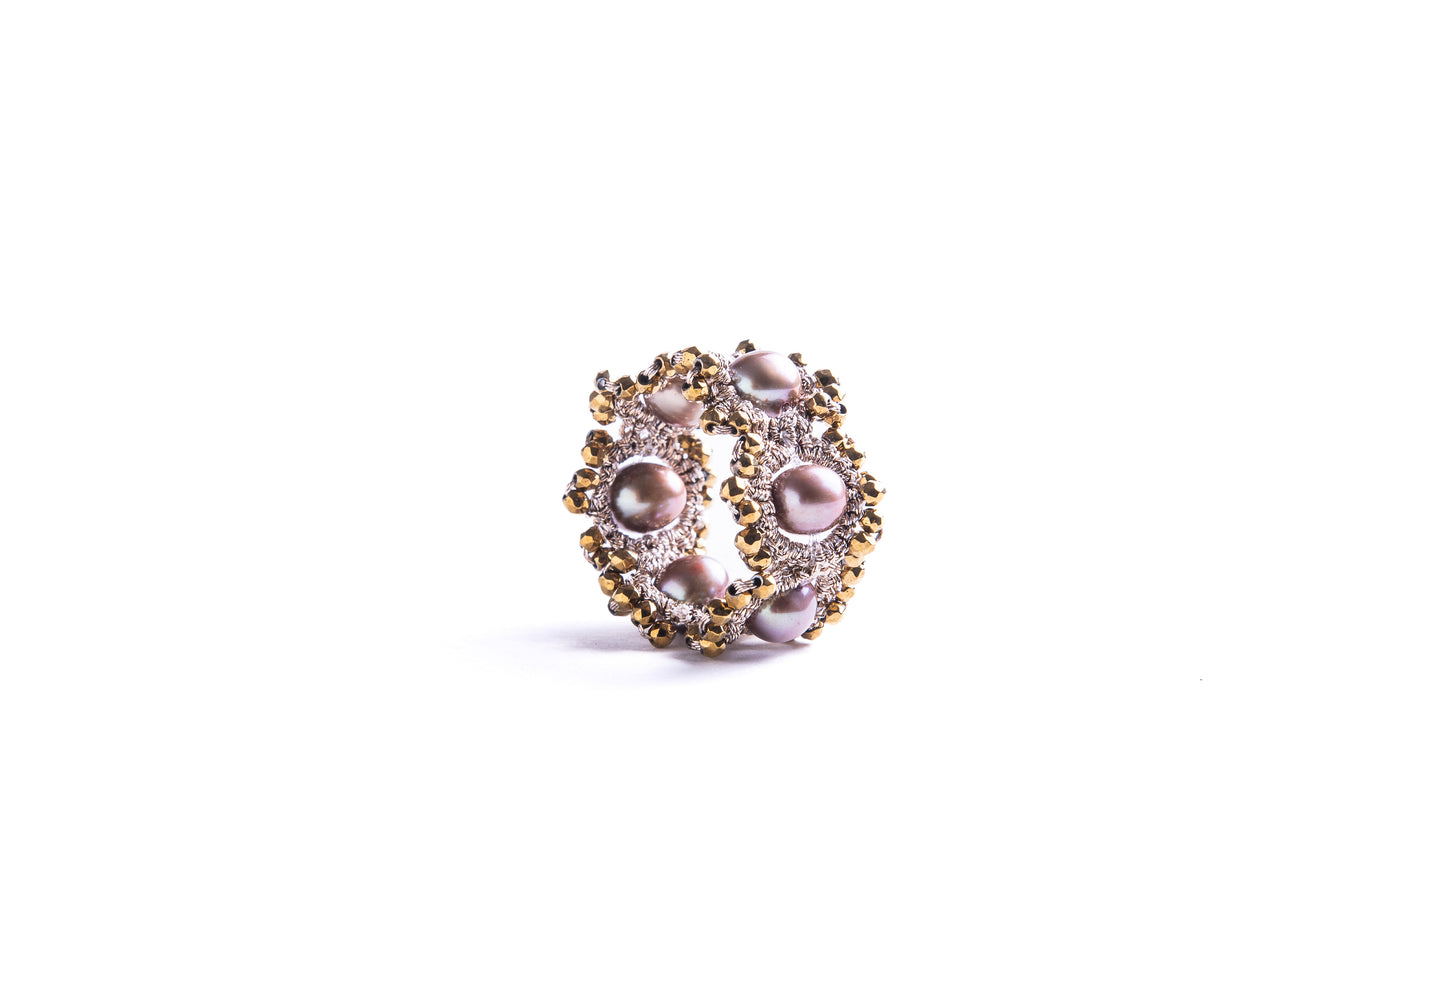 Chic pearl lace ring, dusty rose gold